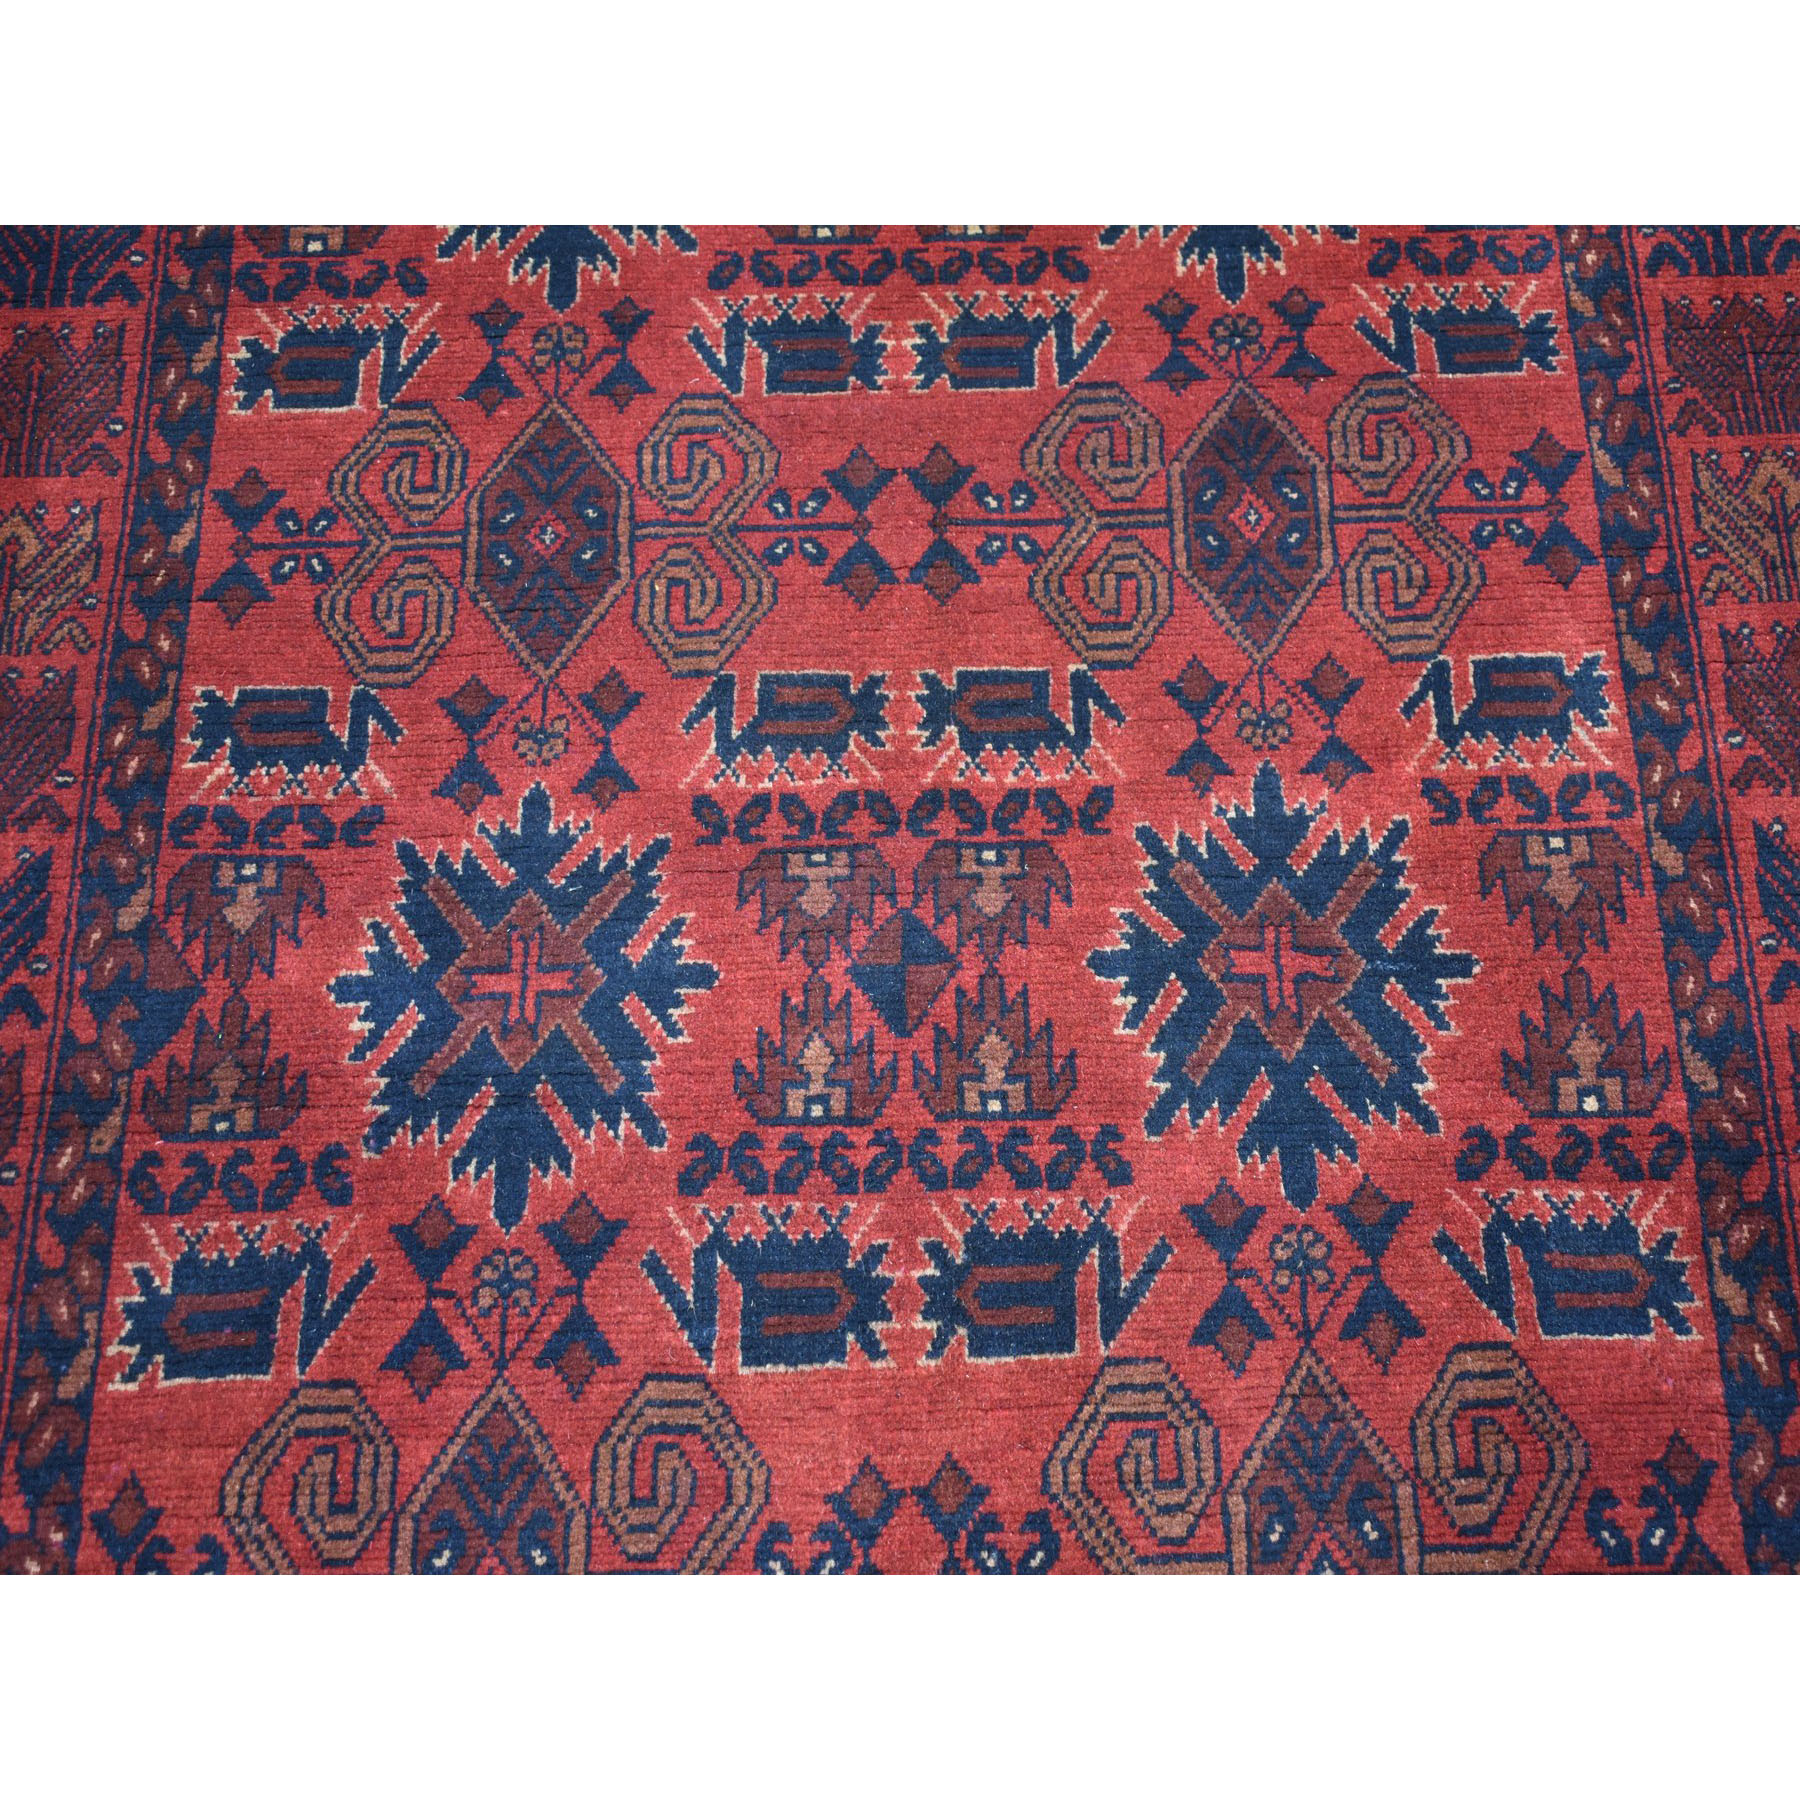 4-x6-4  Vintage Look Red Geometric Design Afghan Andkhoy Pure Wool Hand-Knotted Oriental Rug 